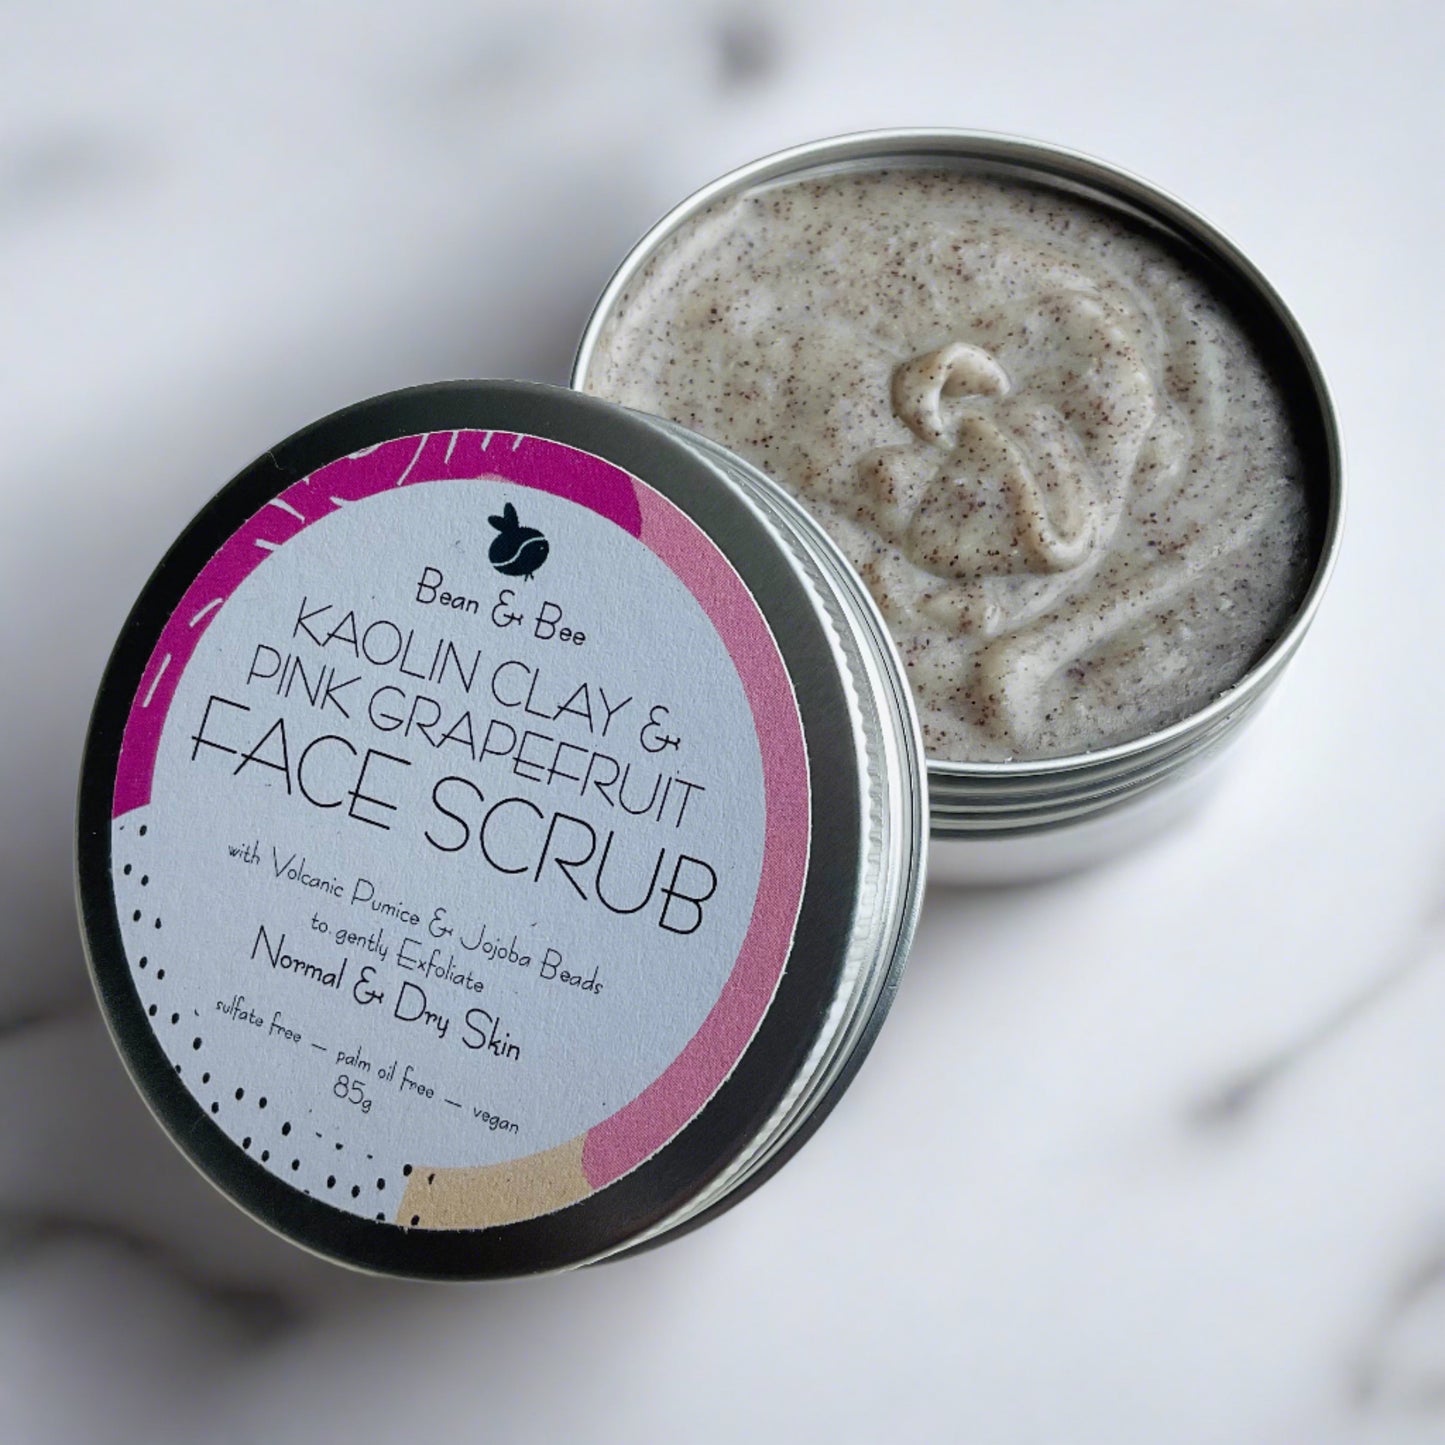 Kaolin clay and pink grapefruit face scrub - Bean and Bee